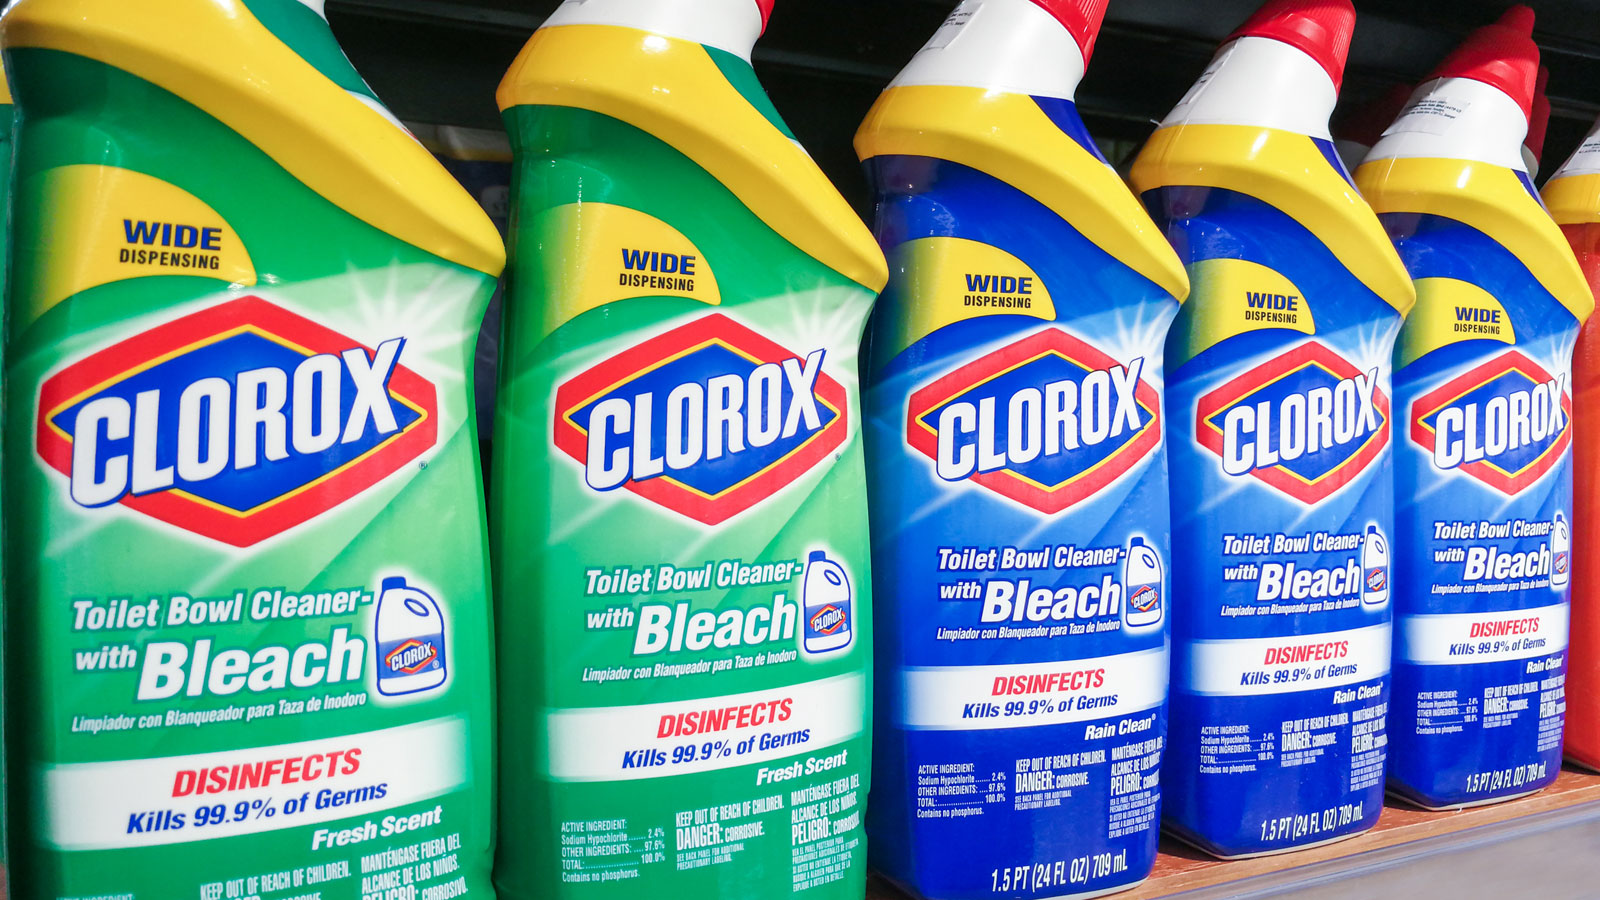 Clorox products connected a shelf